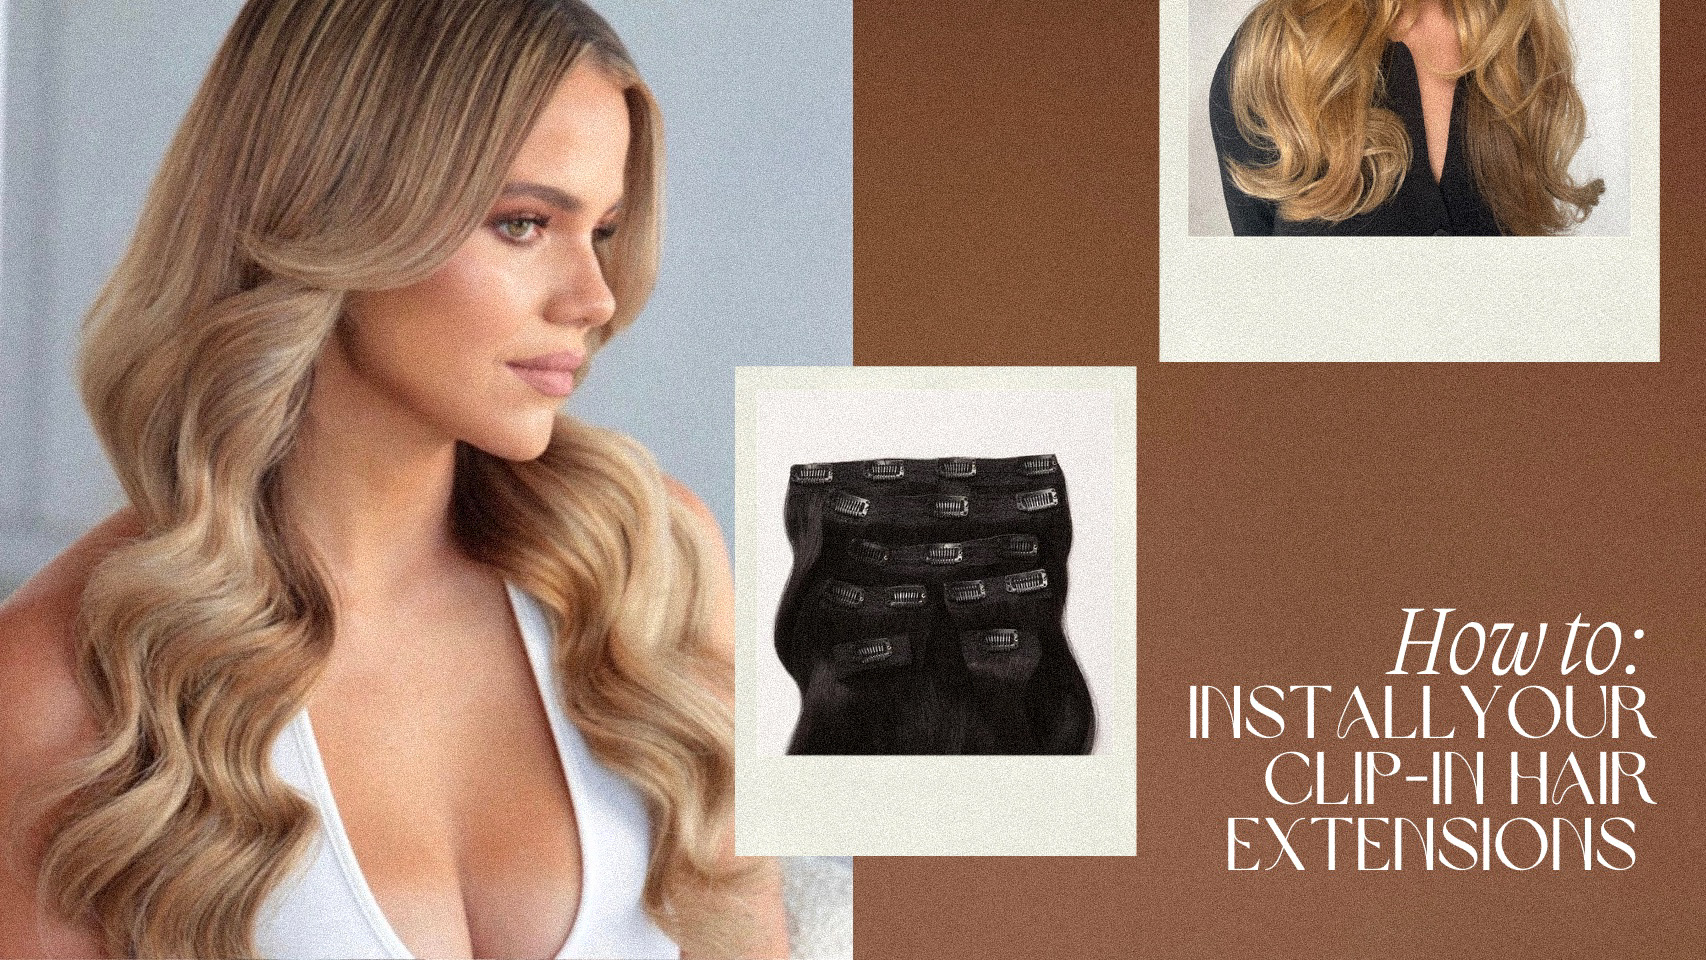 Clip It Like It's Hot: A Step-by-Step Guide to Applying Clip-In Hair Extensions